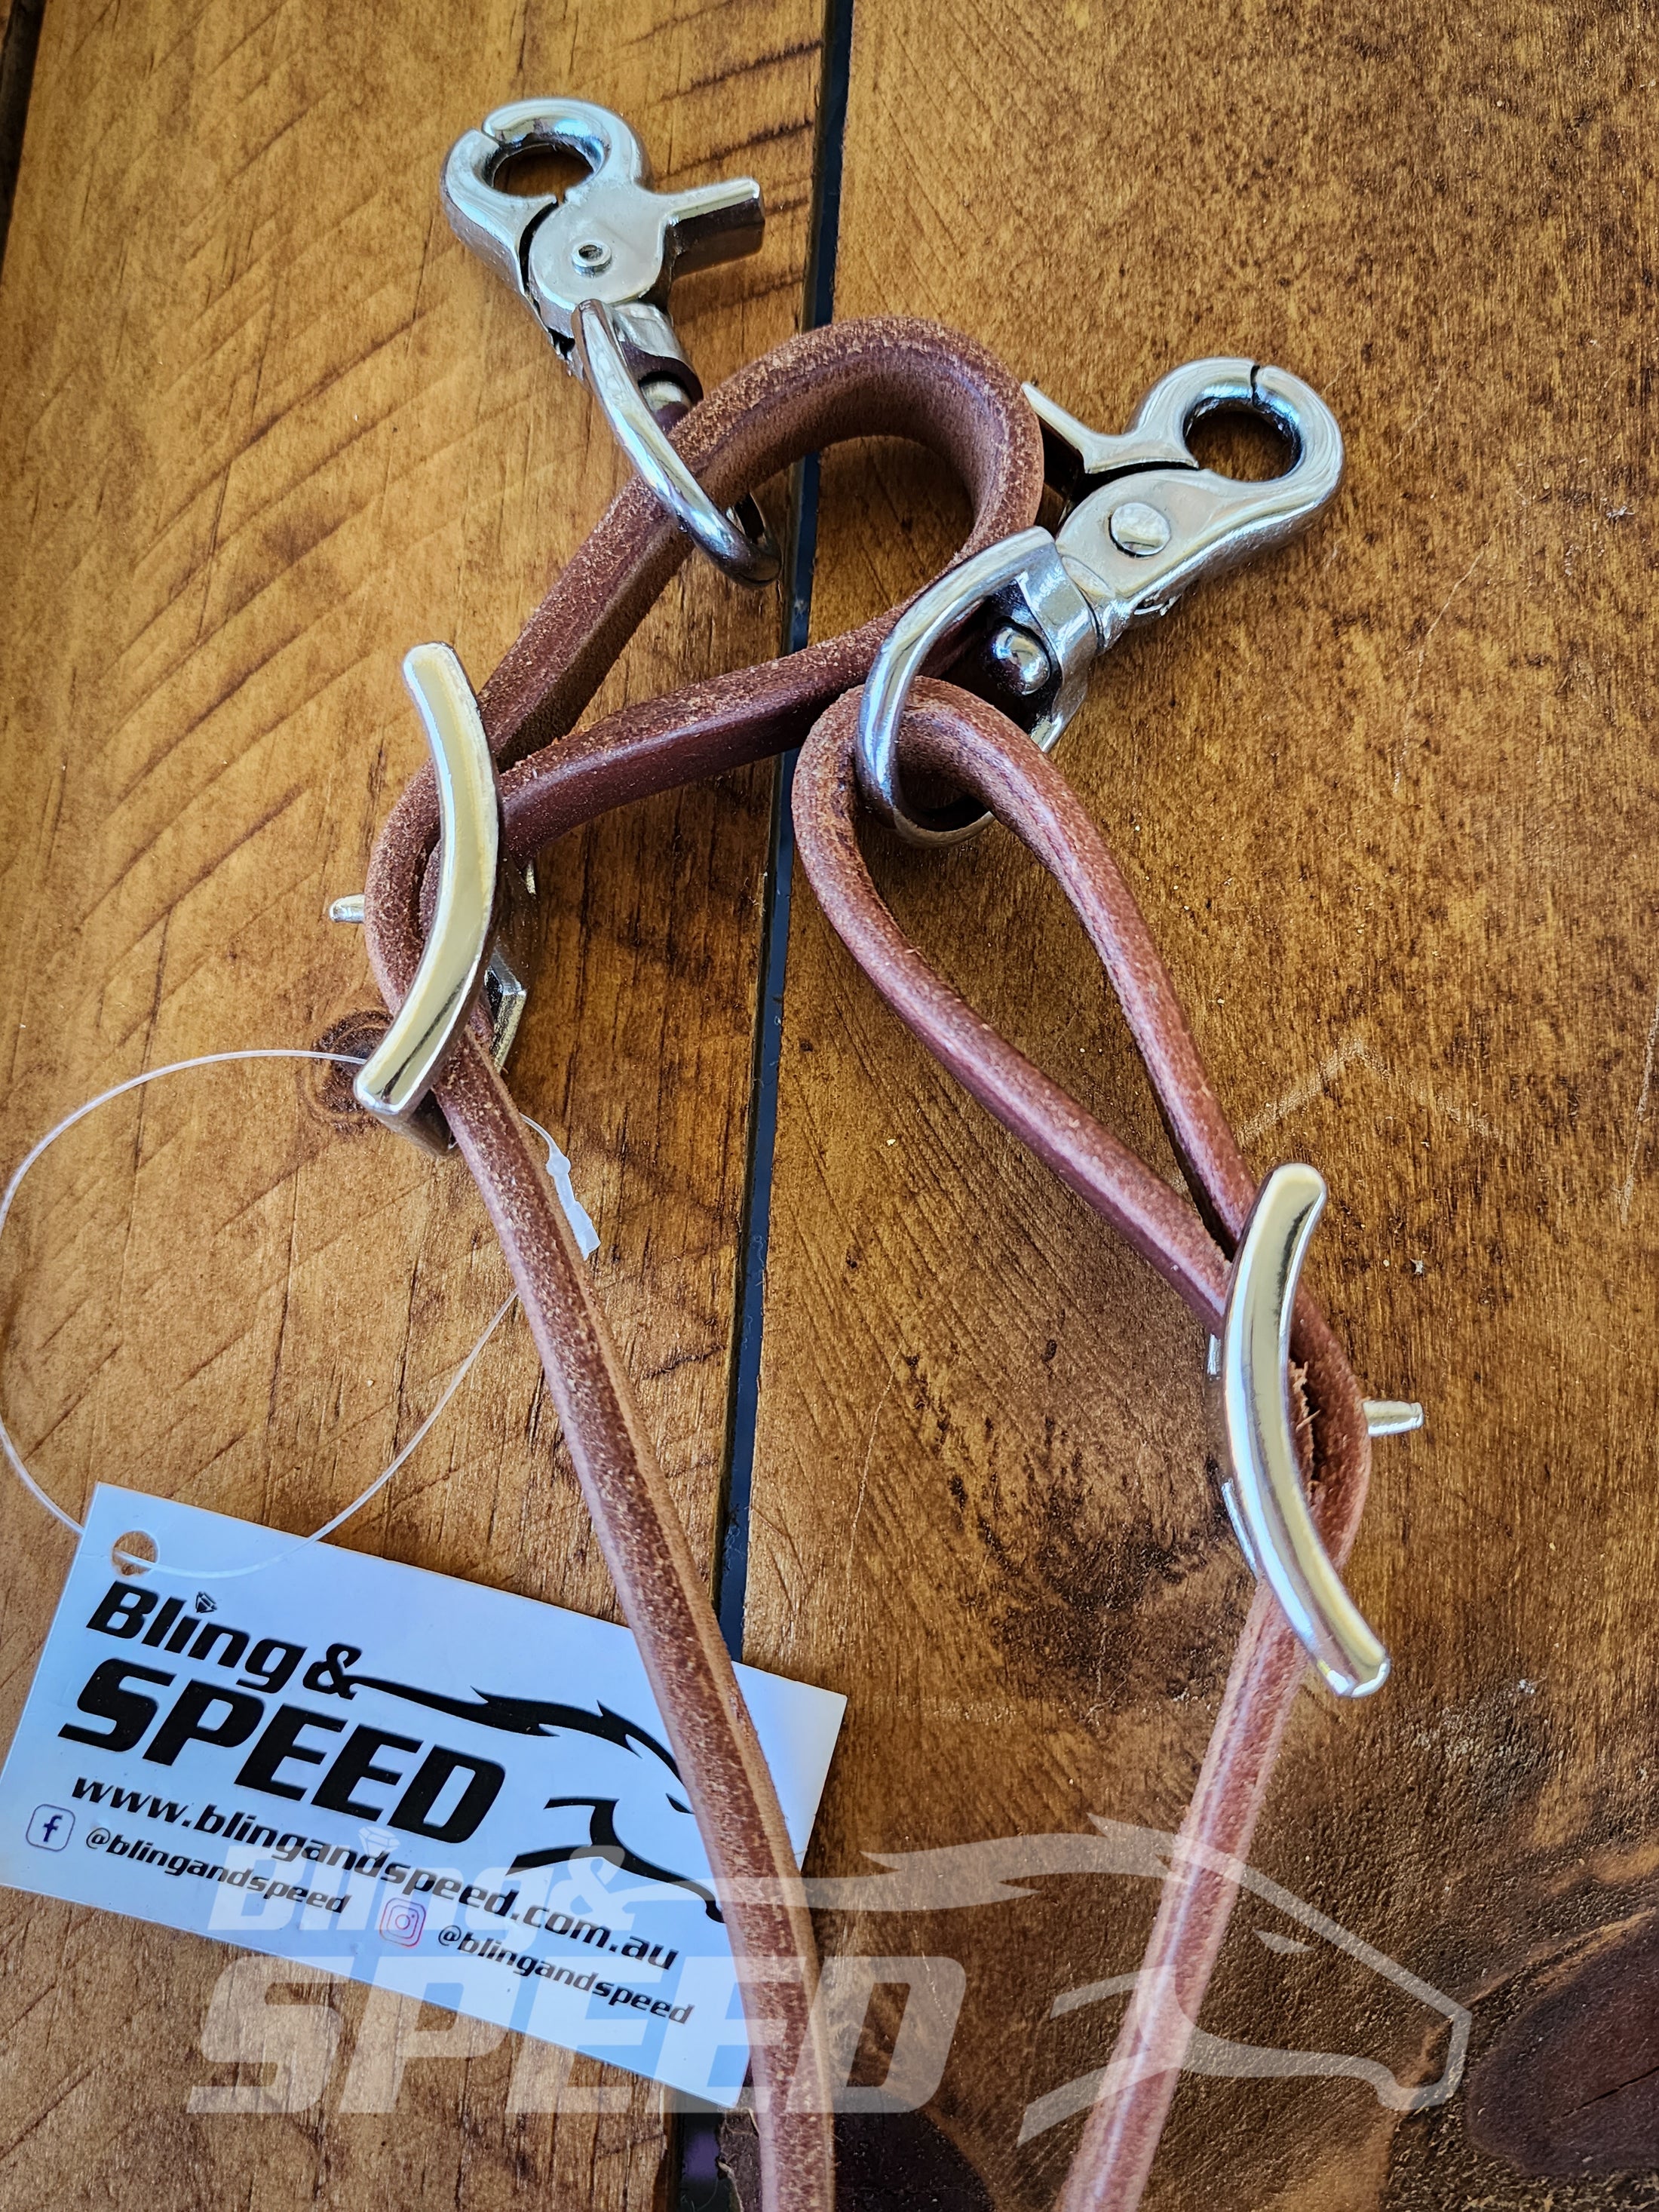 Bling & Speed Twisted Bloodknot Buckstitched Barrel Reins - White (7977759539438)